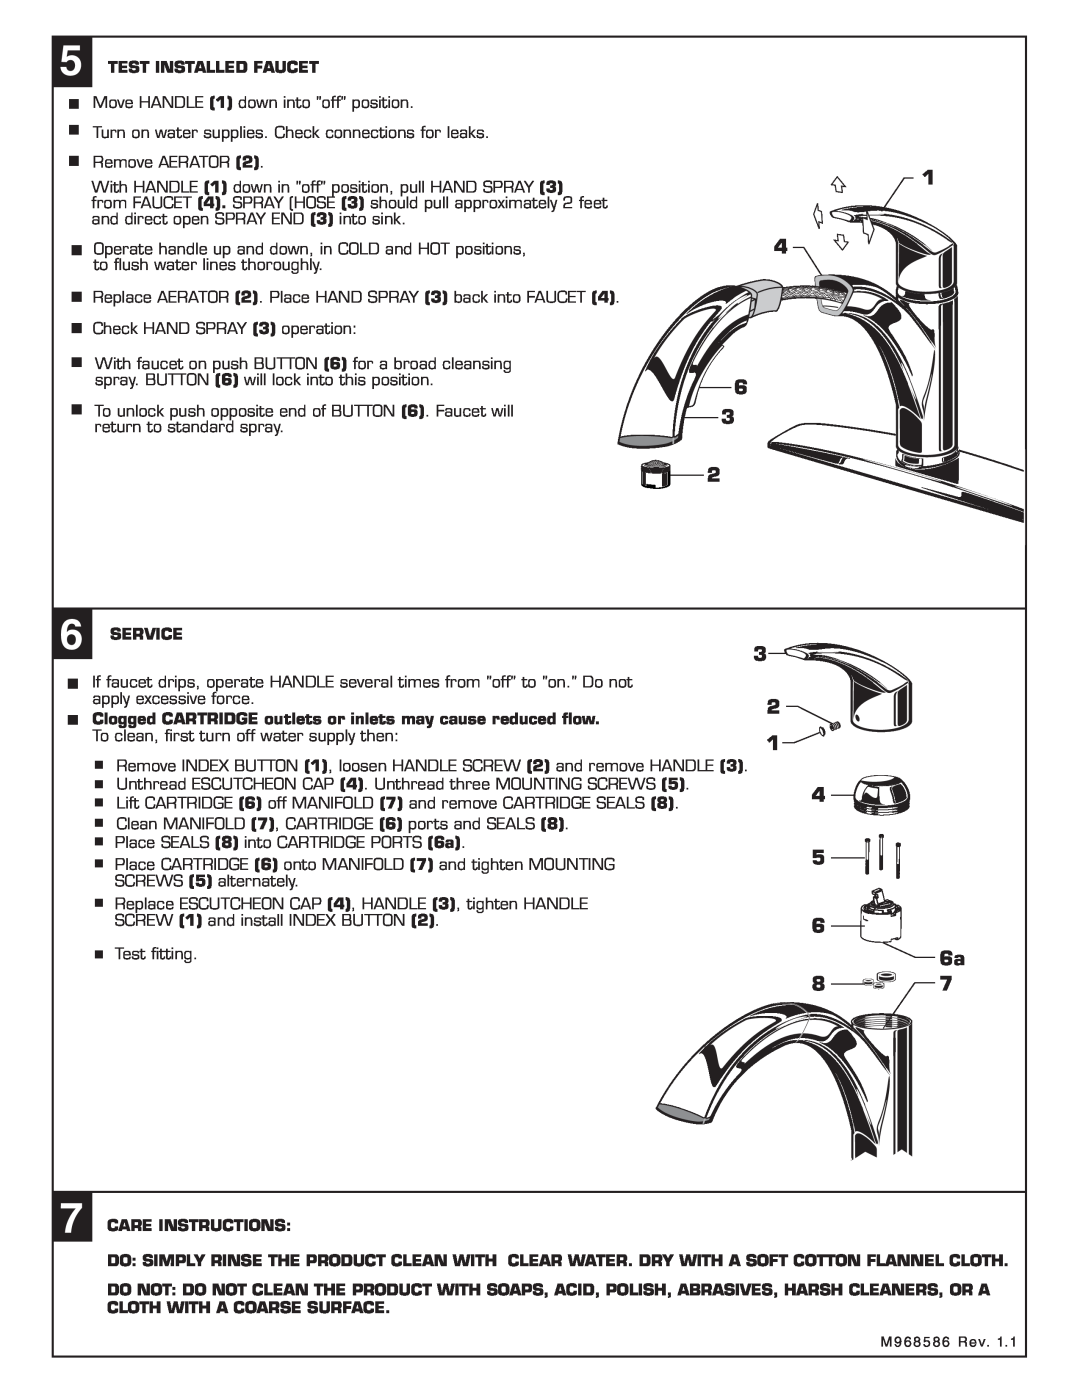 American Standard M968586 Test Installed Faucet, Service, Clogged CARTRIDGE outlets or inlets may cause reduced ﬂow 